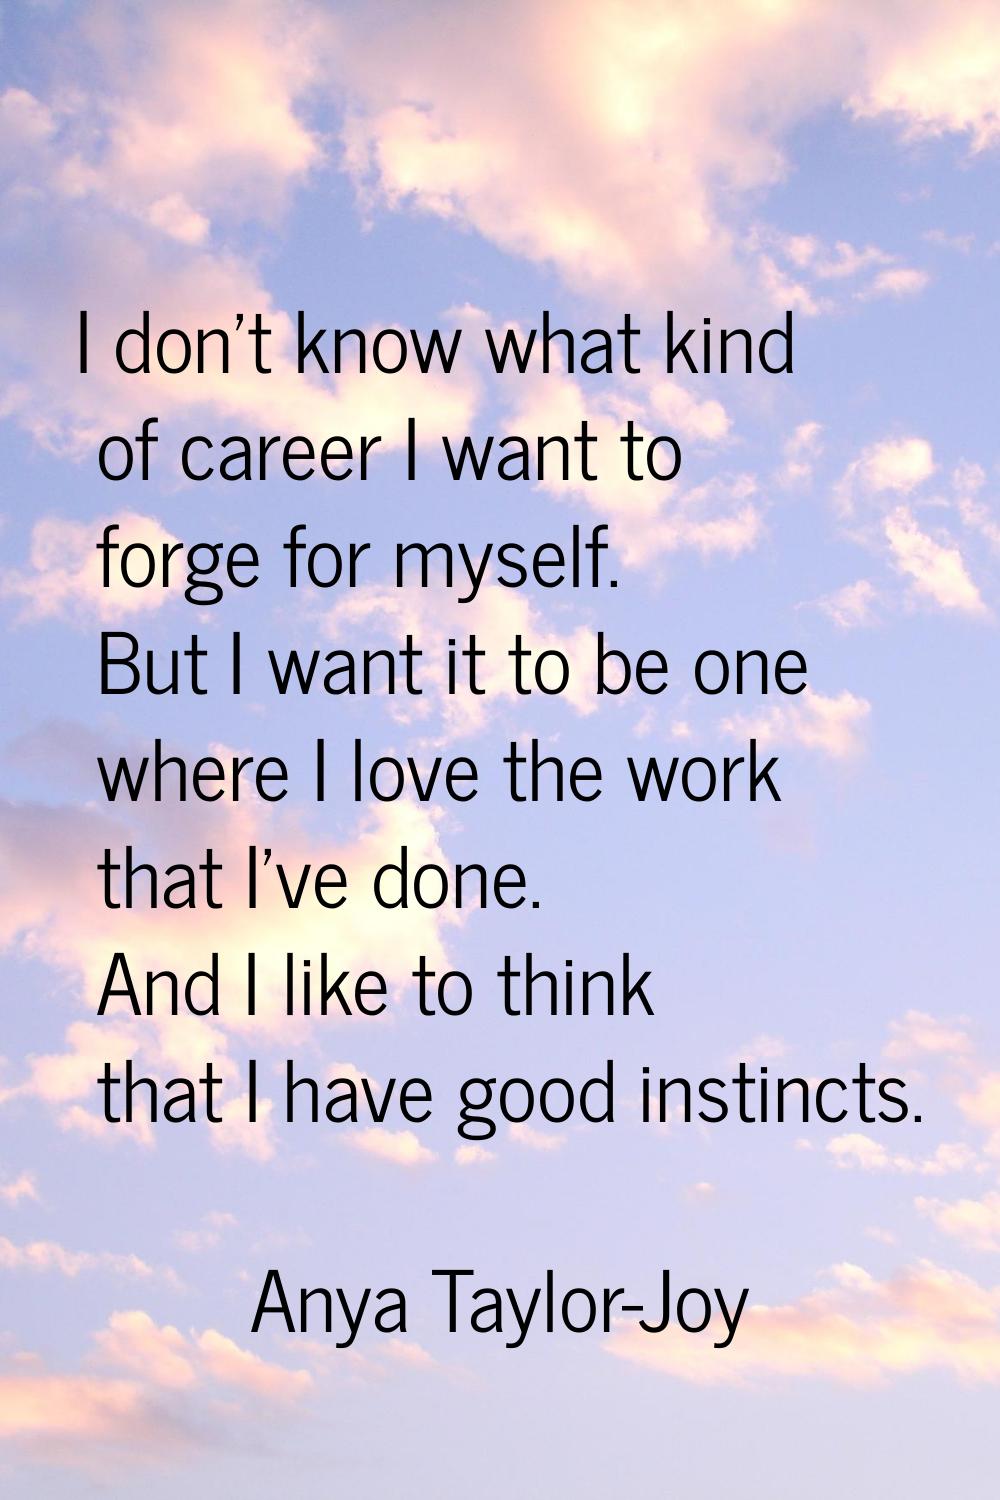 I don't know what kind of career I want to forge for myself. But I want it to be one where I love t